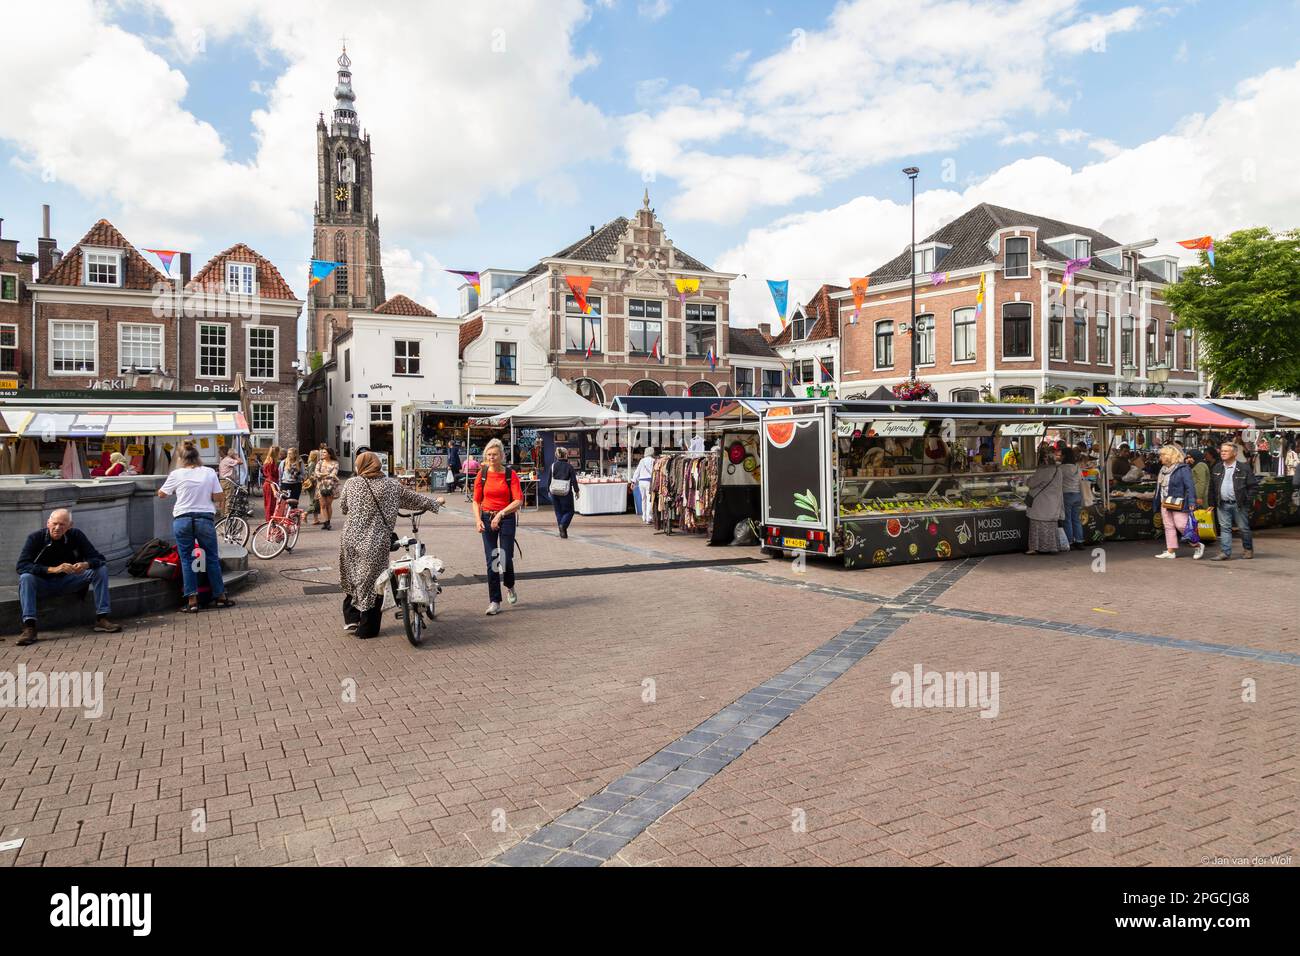 Market on the town square de Hof in the center of Amersfoort. Stock Photo